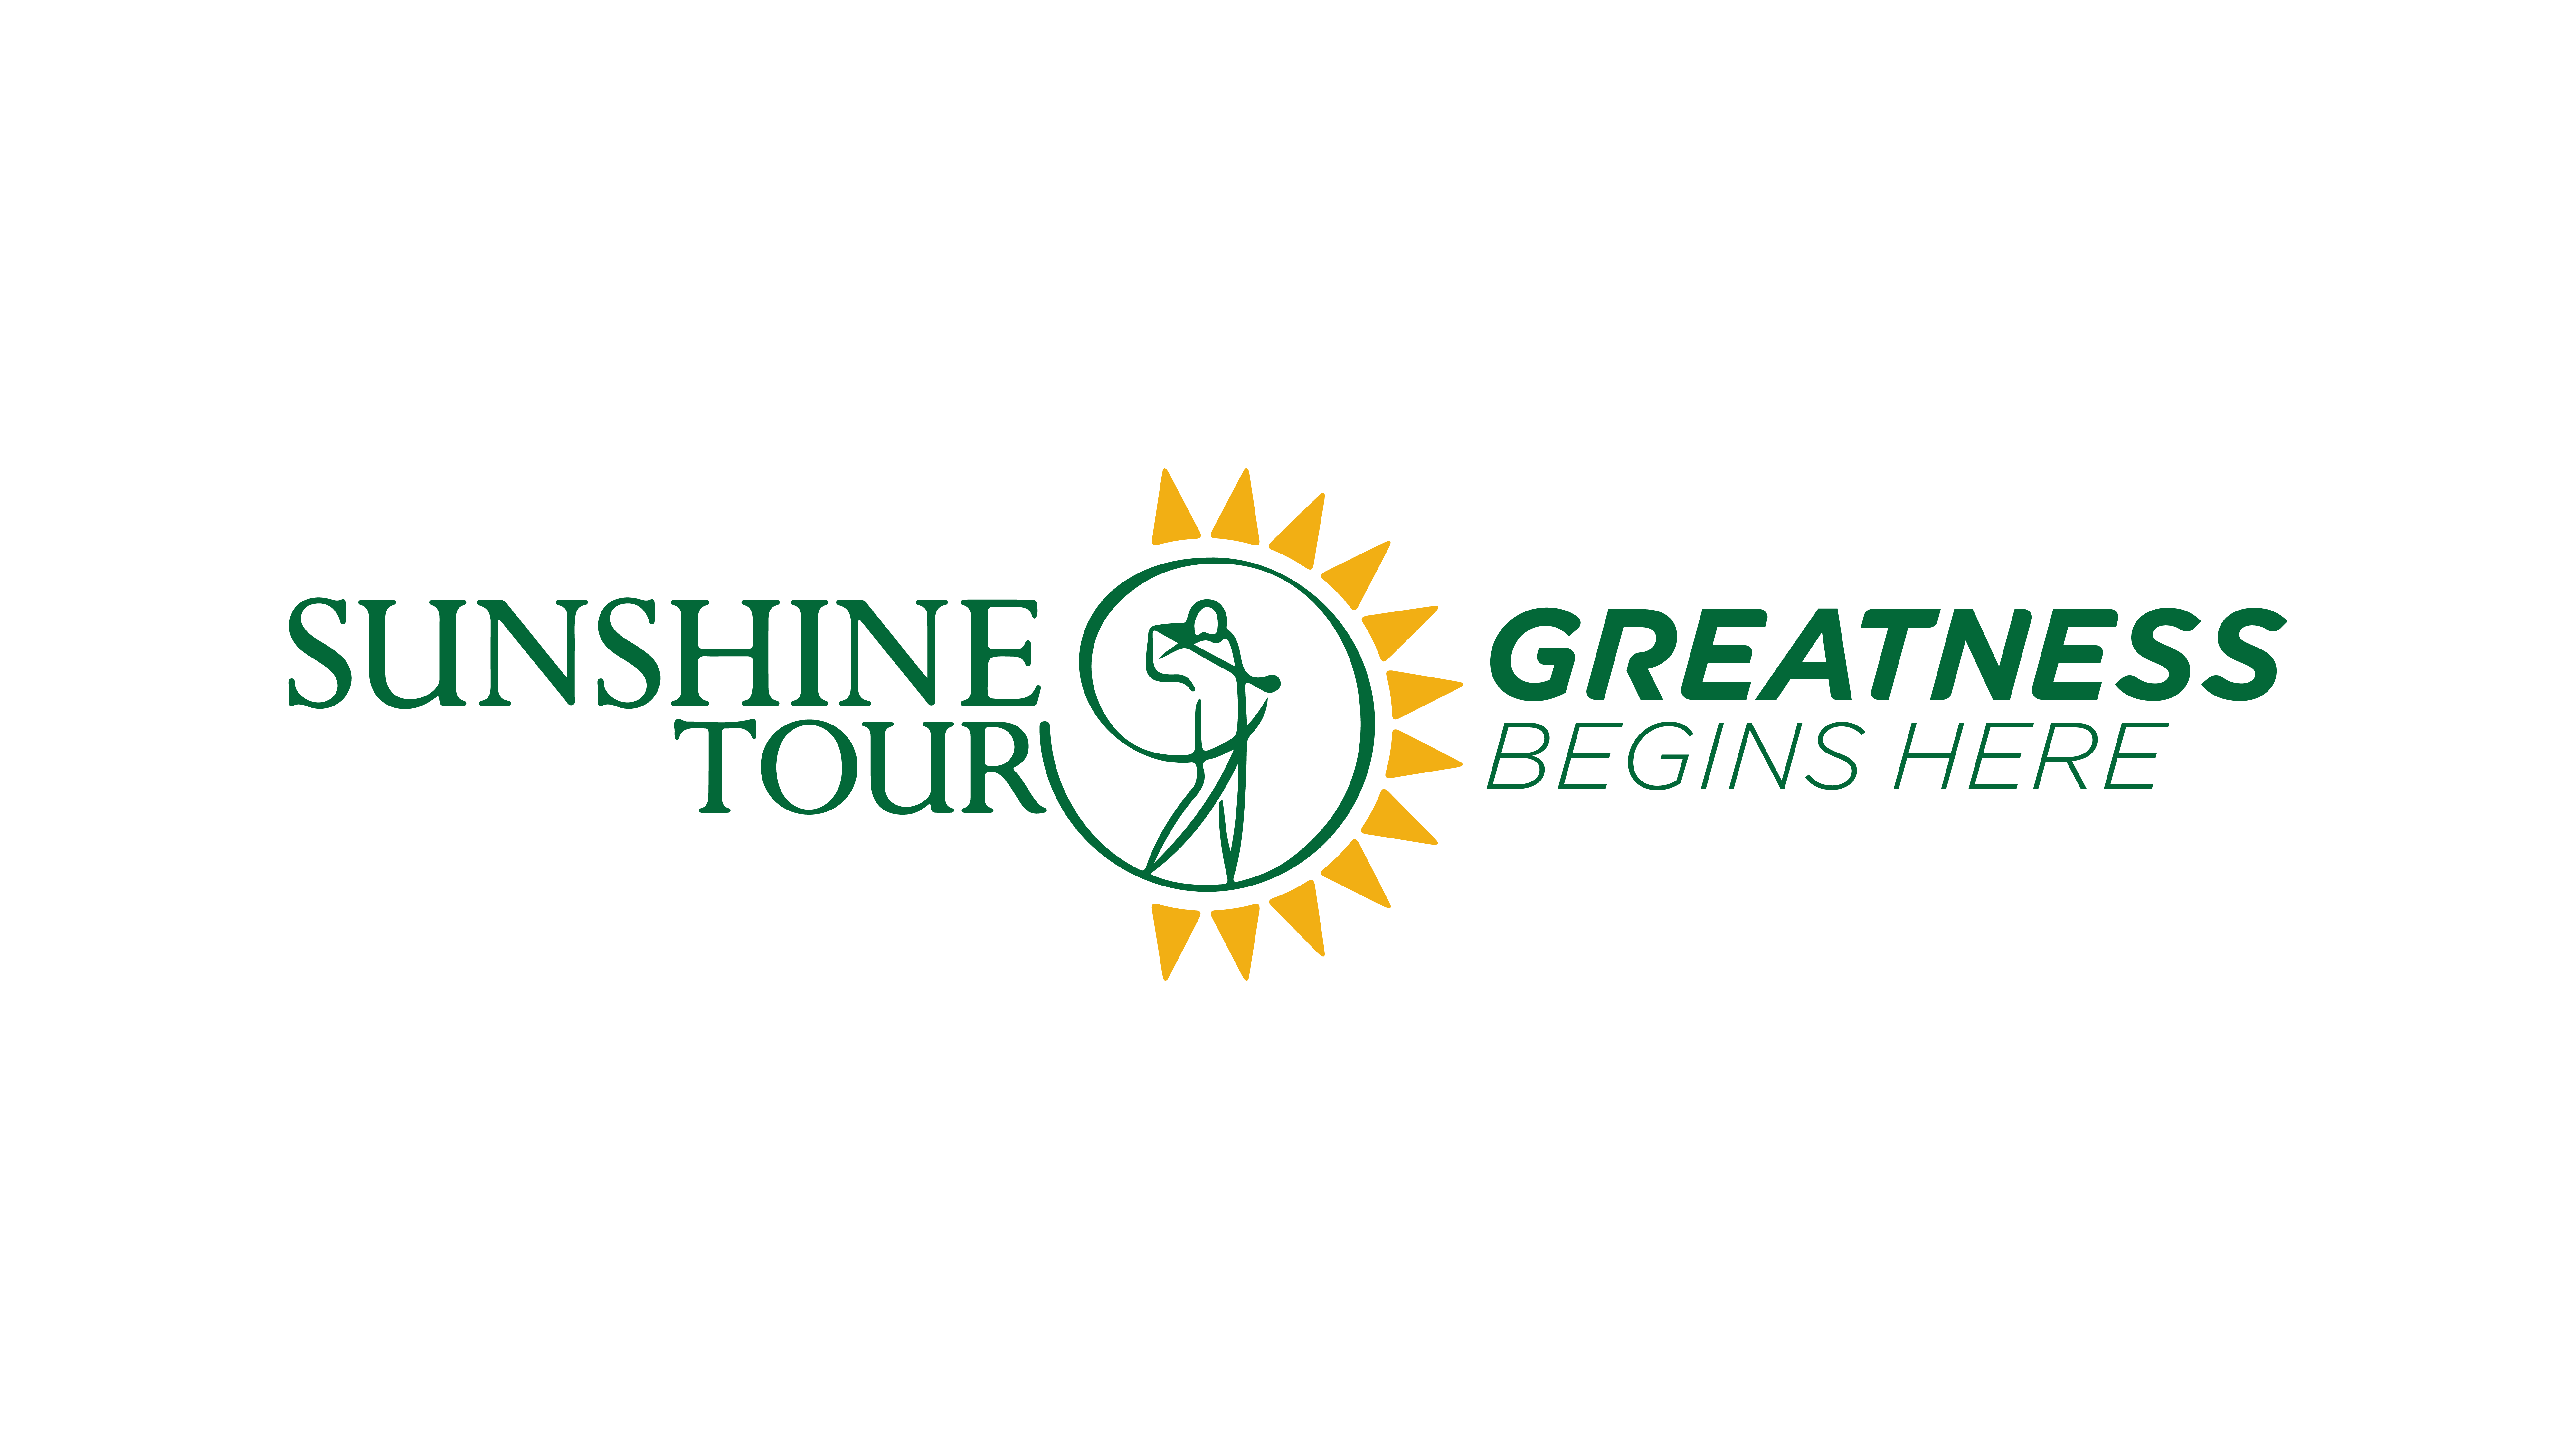 Sunshine Tour pros and fans Mediclinic’s event expertise